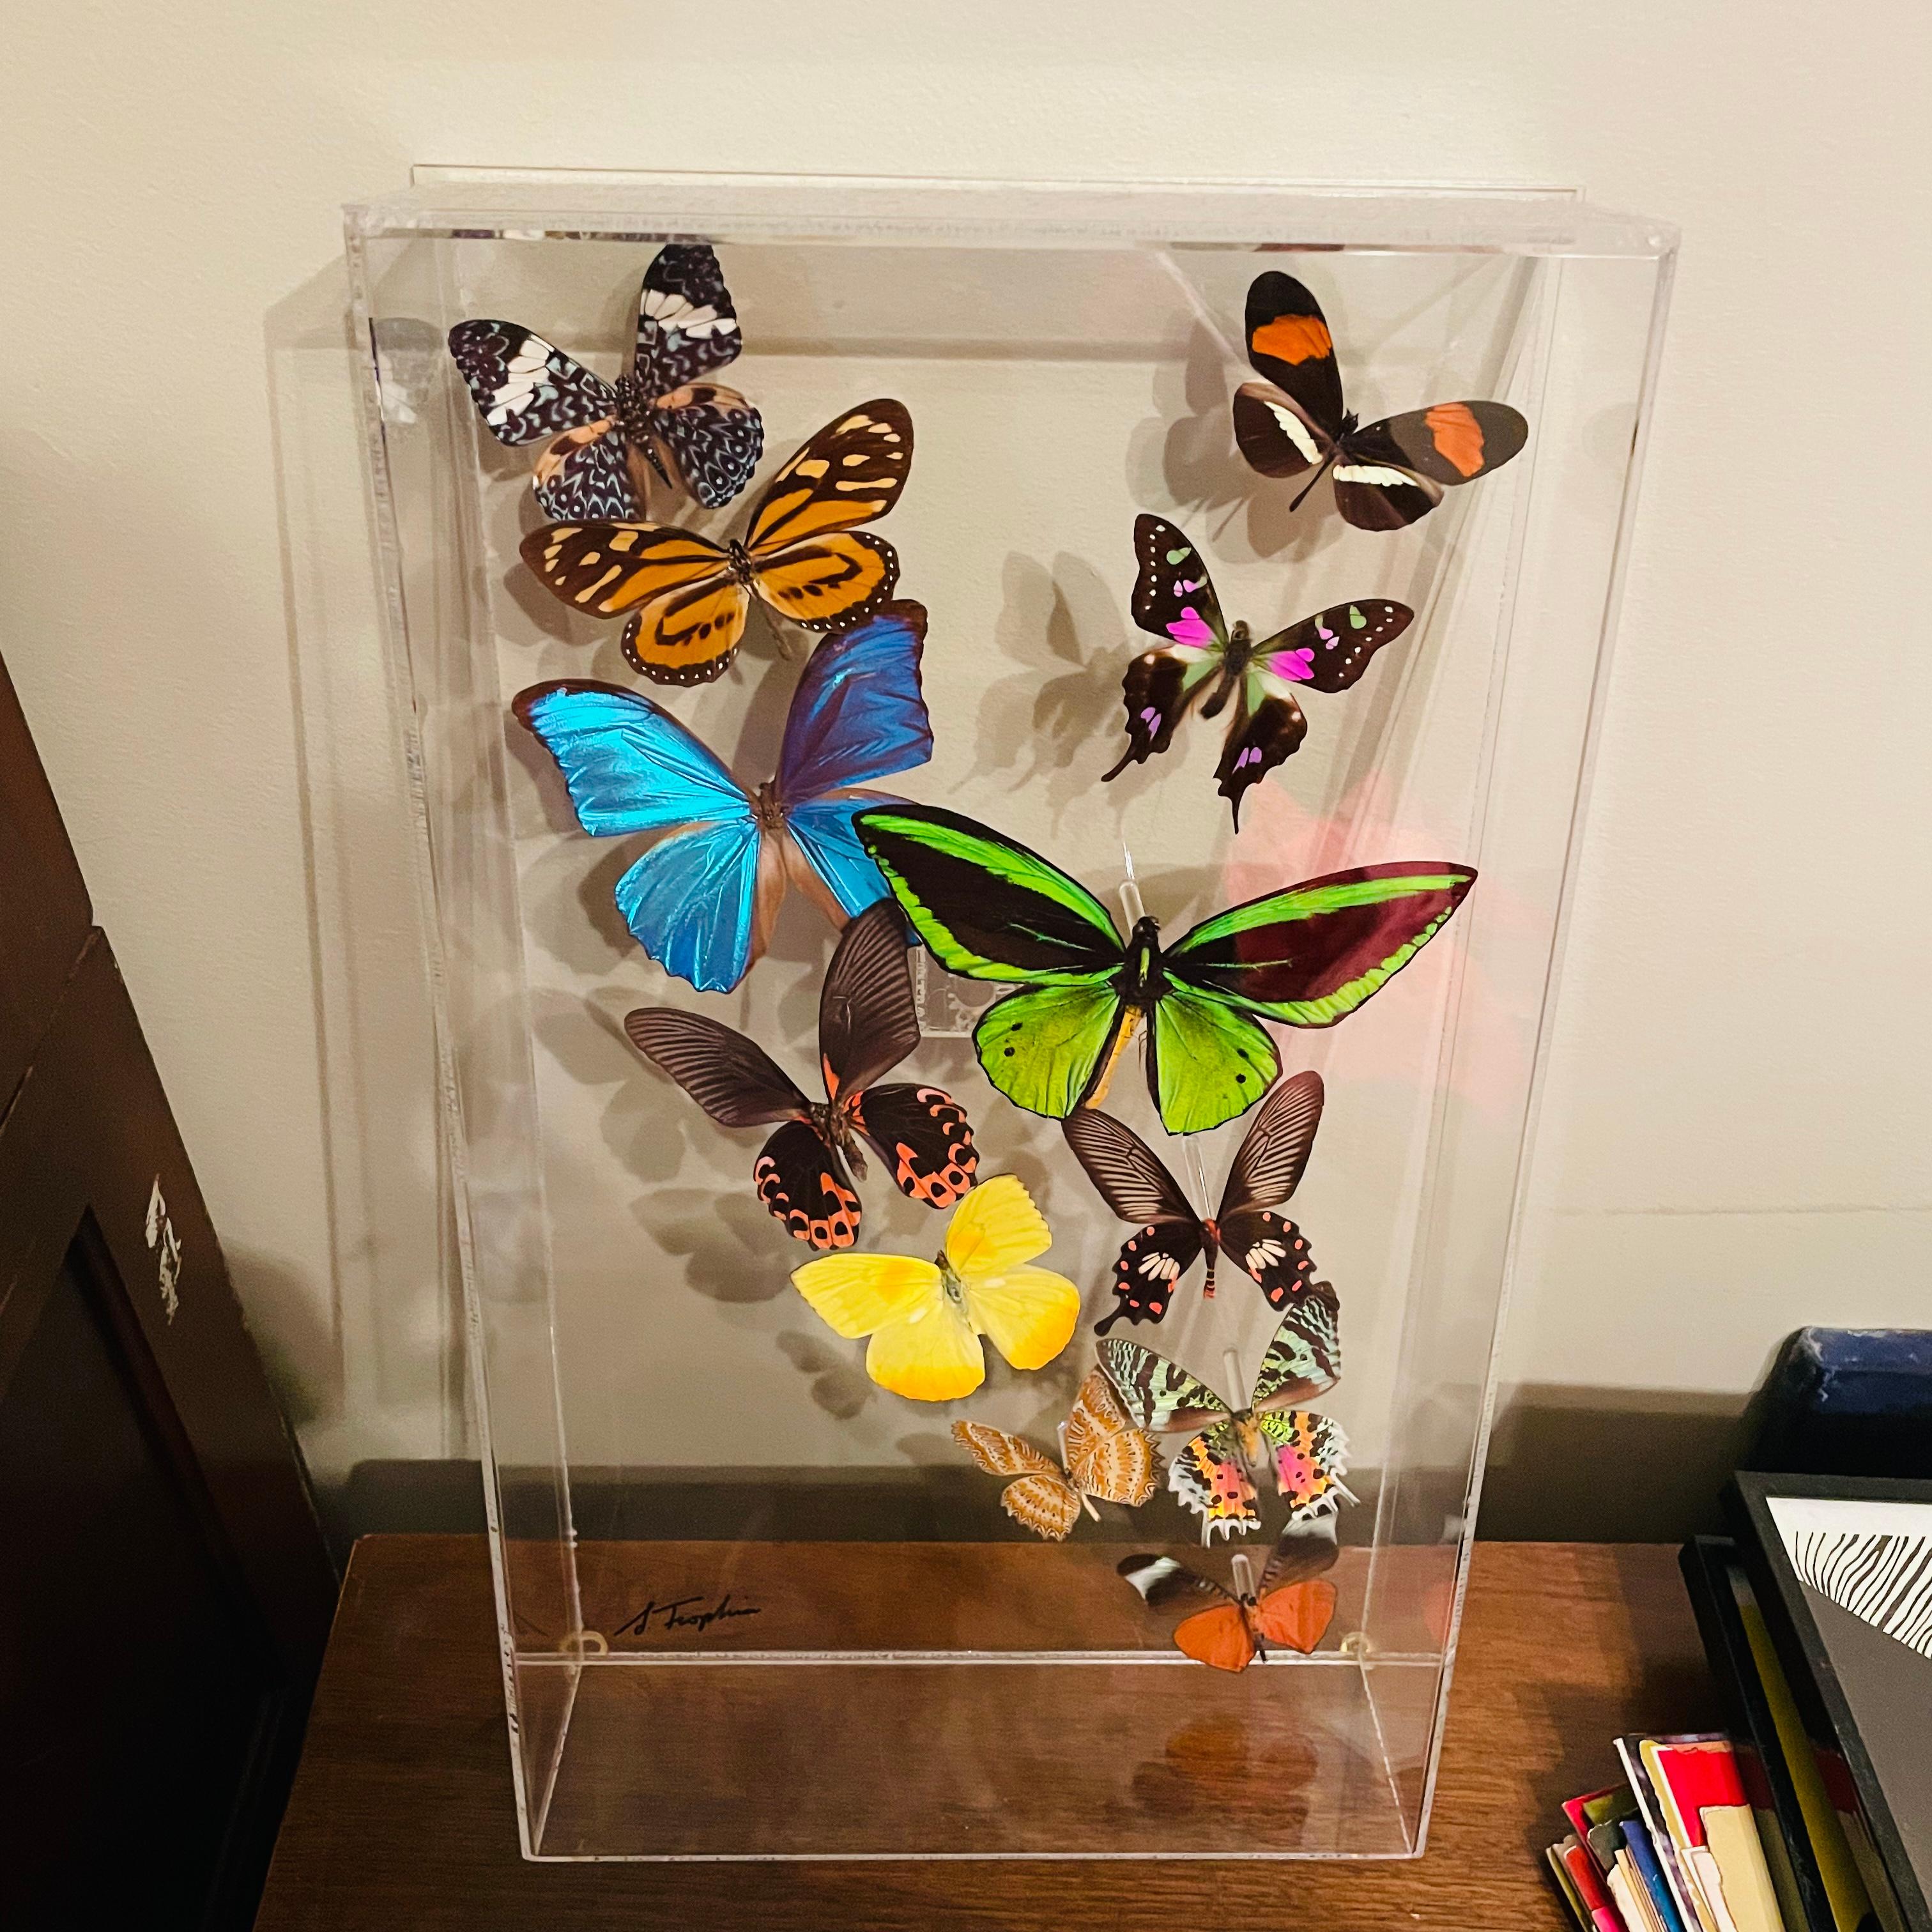 1970s Sam Trophia lucite / acrylic shadow box which depicts a dozen different butterfly beauty preserved and suspended in art form in a spectrum of colors, shapes and sizes. 

Sam Trophia is the butterfly man of the US. In Key West, you’ll find